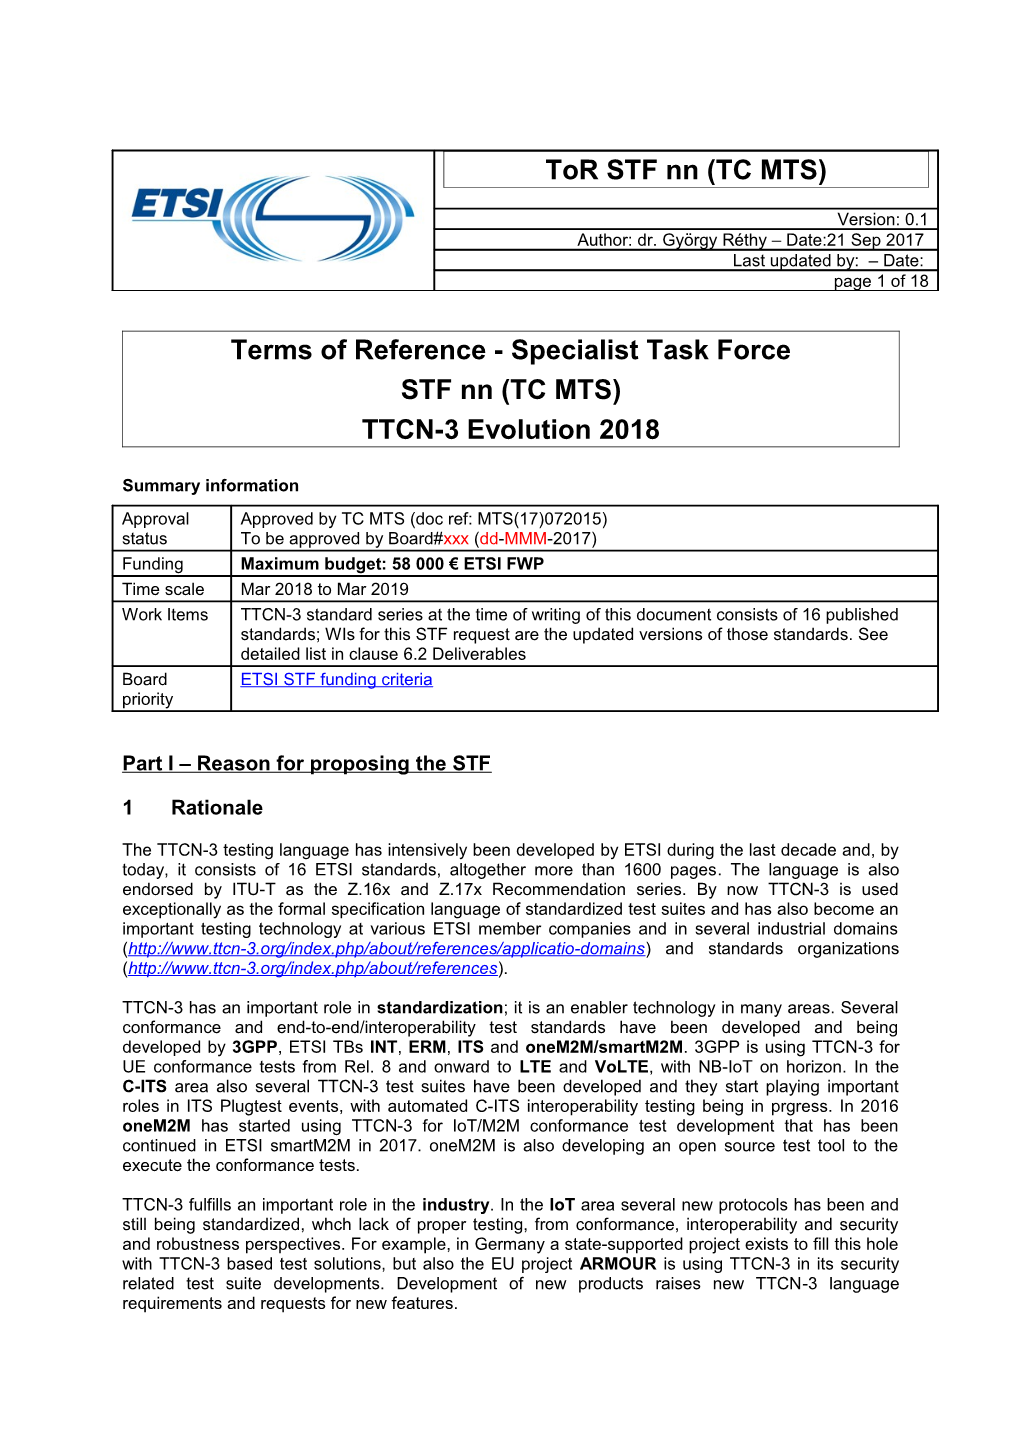 CL17 3349 Call for Expertise Specialist Task Force STF BD (TC MTS) on TTCN-3 Evolution 2017